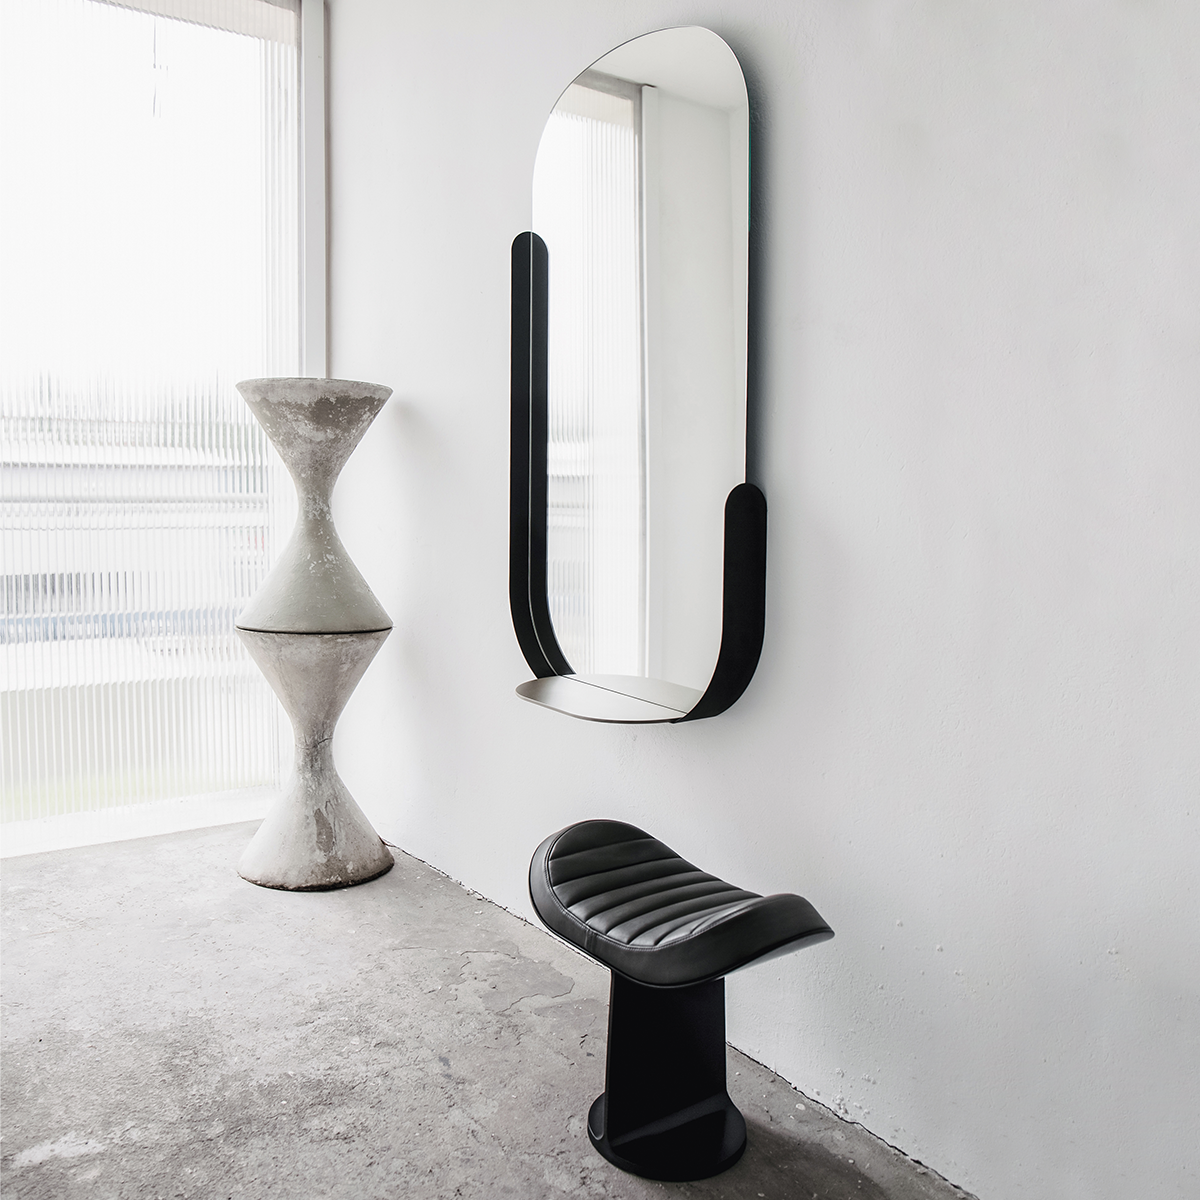 H.E.A.310 grey leather upholstered stool and Wonderland mirror with a tray by Christophe de la Fontaine for Dante - Goods and Bads